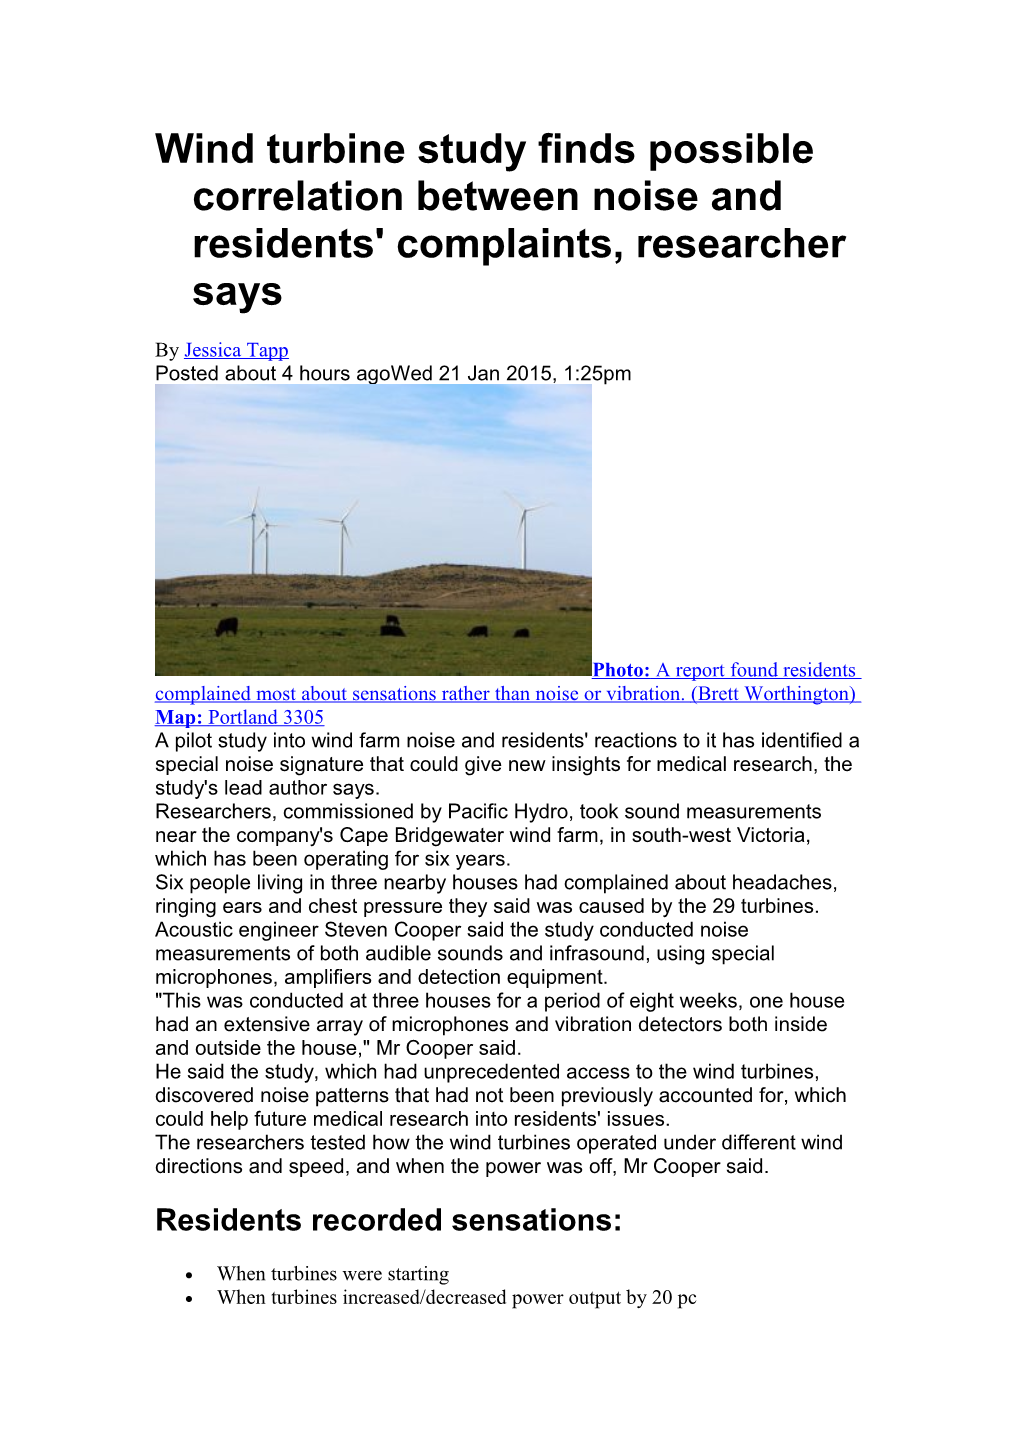 Wind Turbine Study Finds Possible Correlation Between Noise and Residents' Complaints